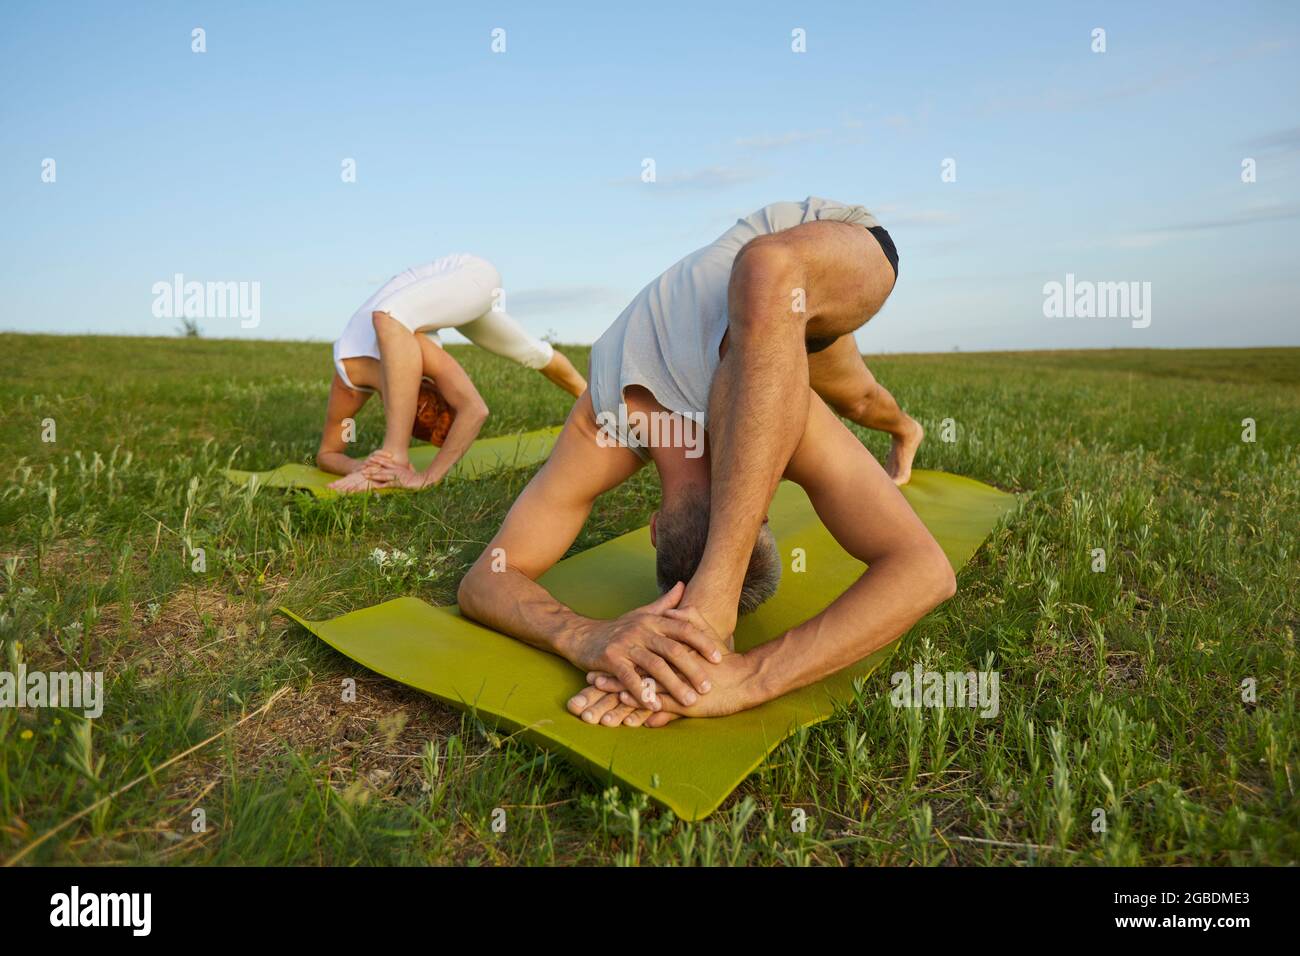 Man and woman doing complicated bending exercises on green grass in summer field Stock Photo